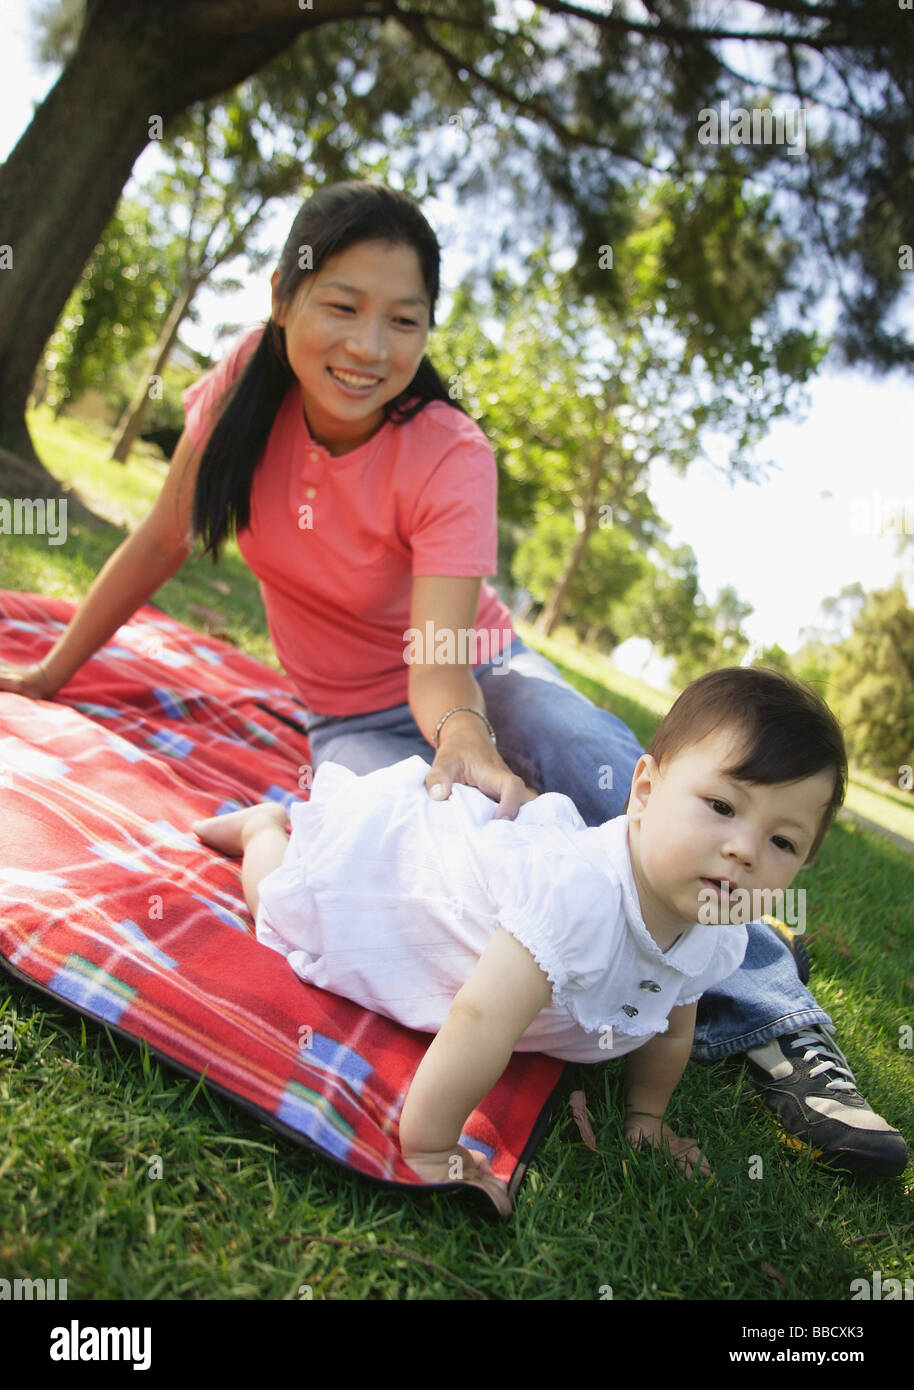 Mother and daughter on picnic blanket in park Stock Photo